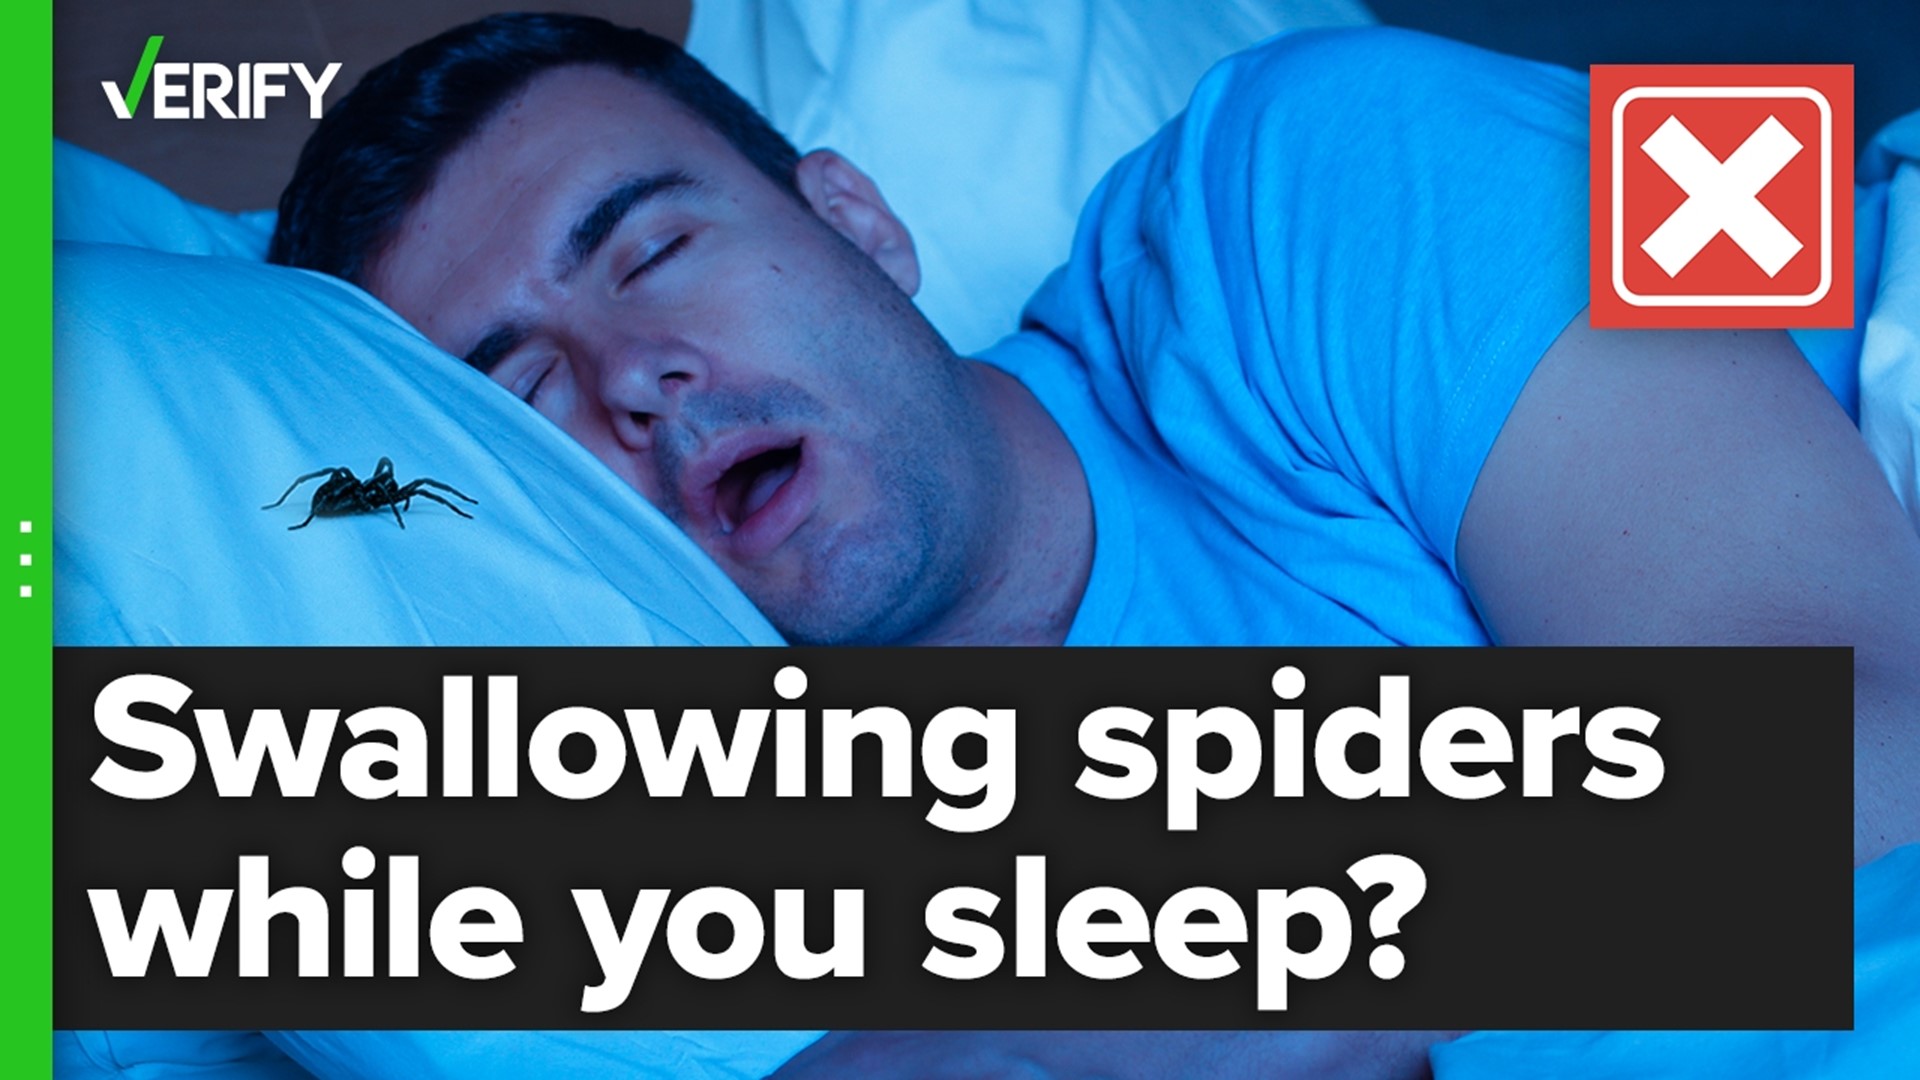 There's no evidence humans regularly swallow spiders while sleeping. It's an urban legend.